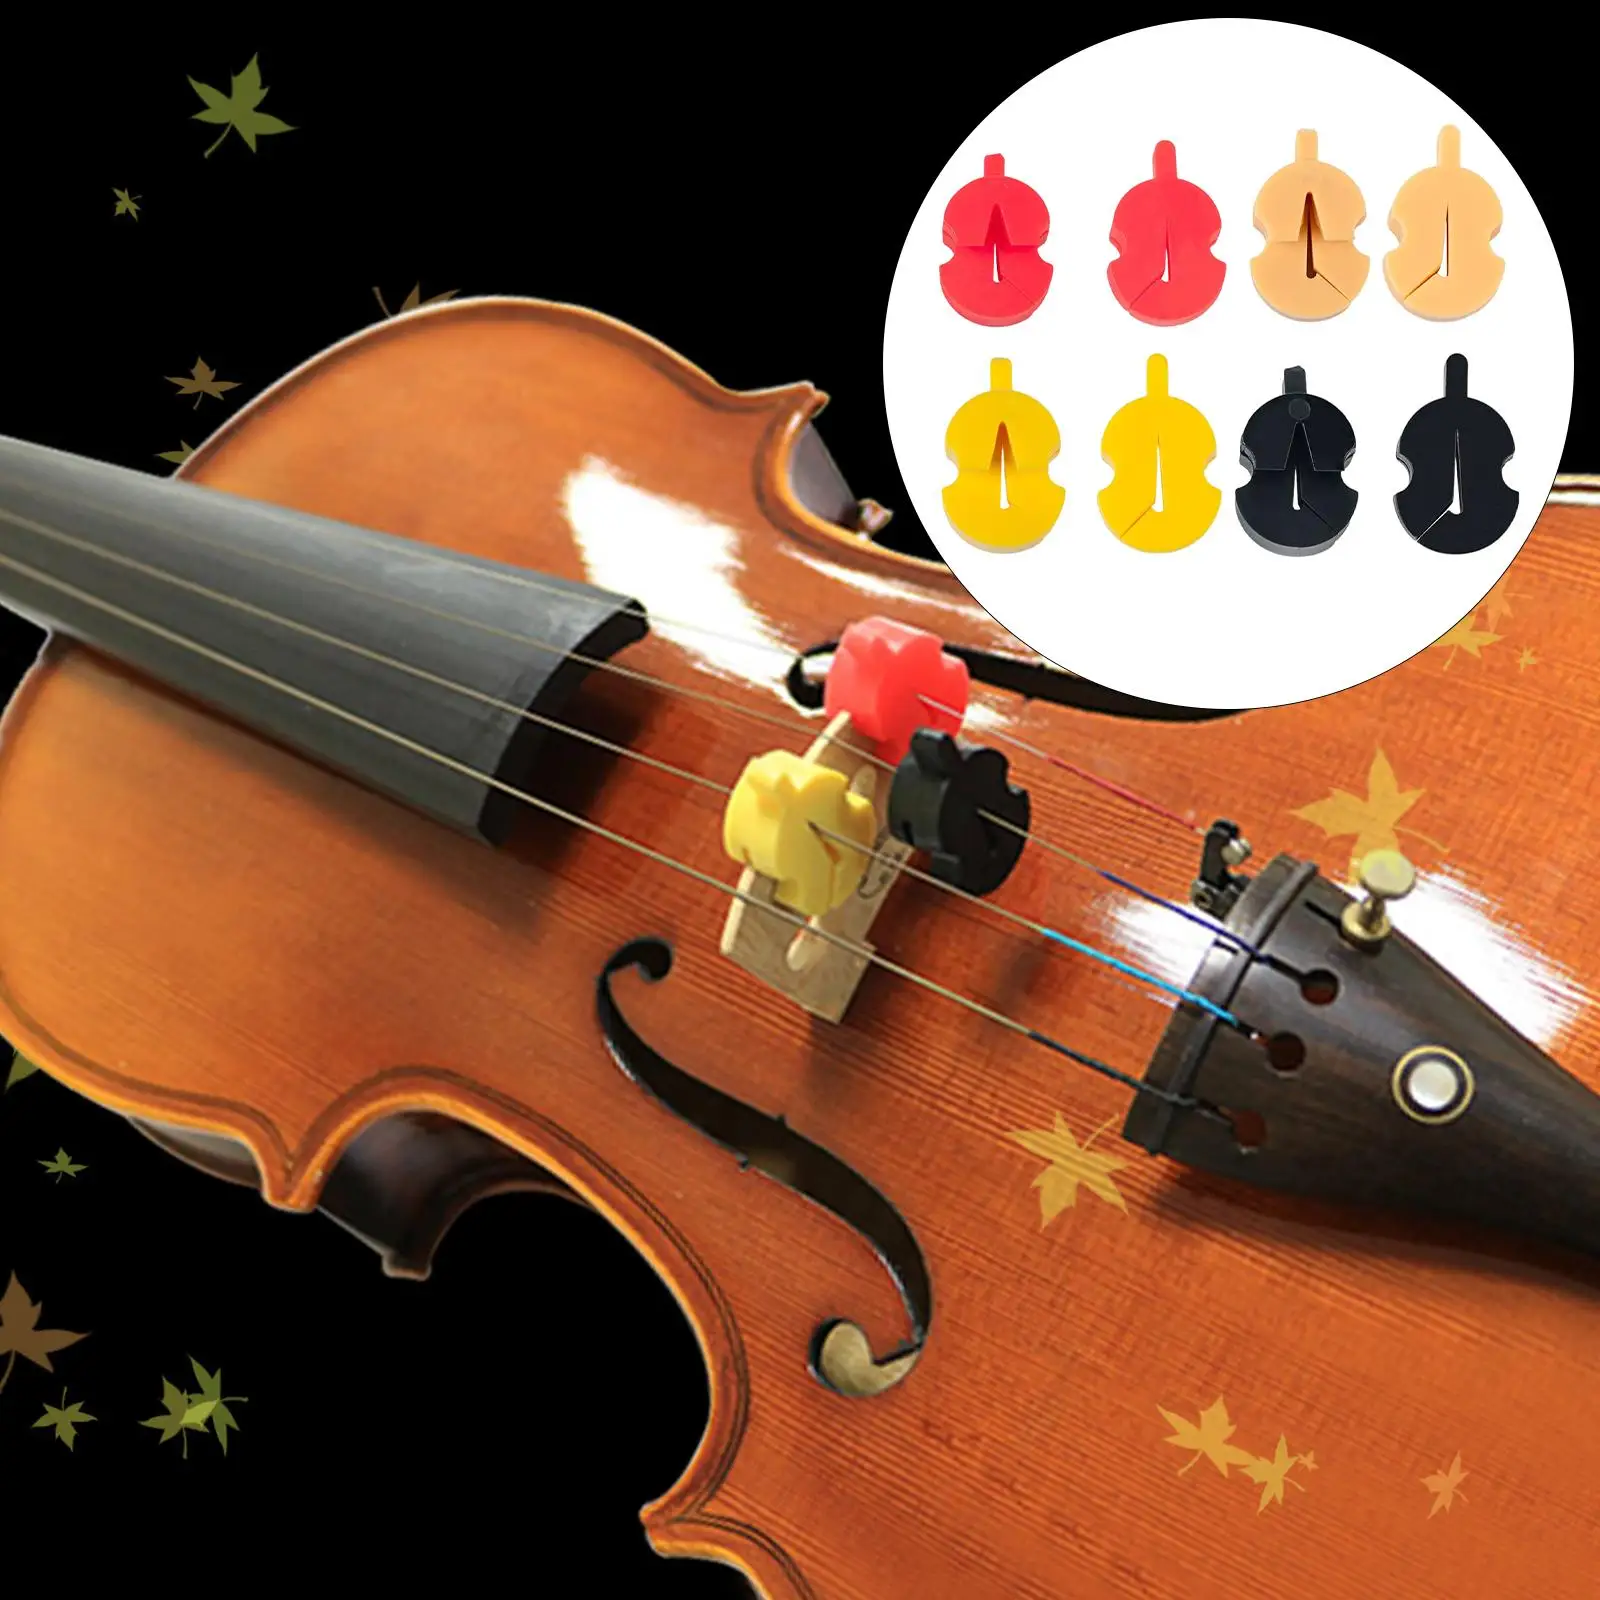 Soft Rubber Violin Strings Dampener Silence for Acoustic Violin Accessory